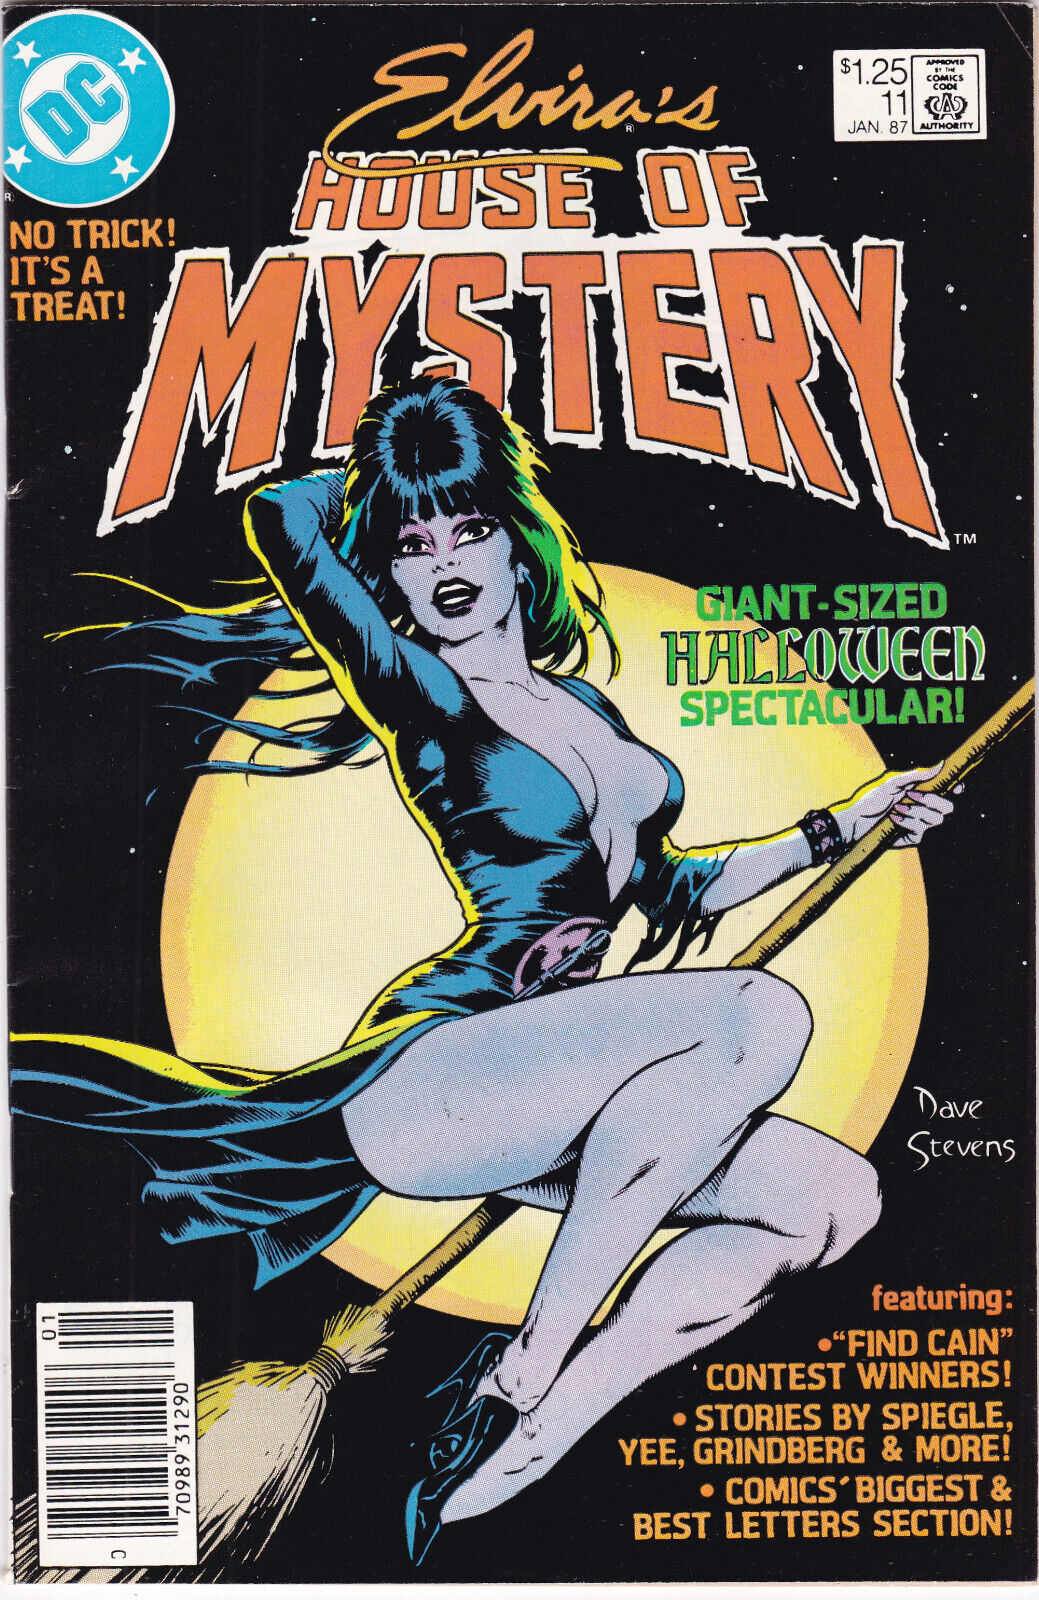 ELVIRA\'S HOUSE OF MYSTERY #11  VERY FINE DAVE STEVENS NEWSSTAND SEXY COVER 1987